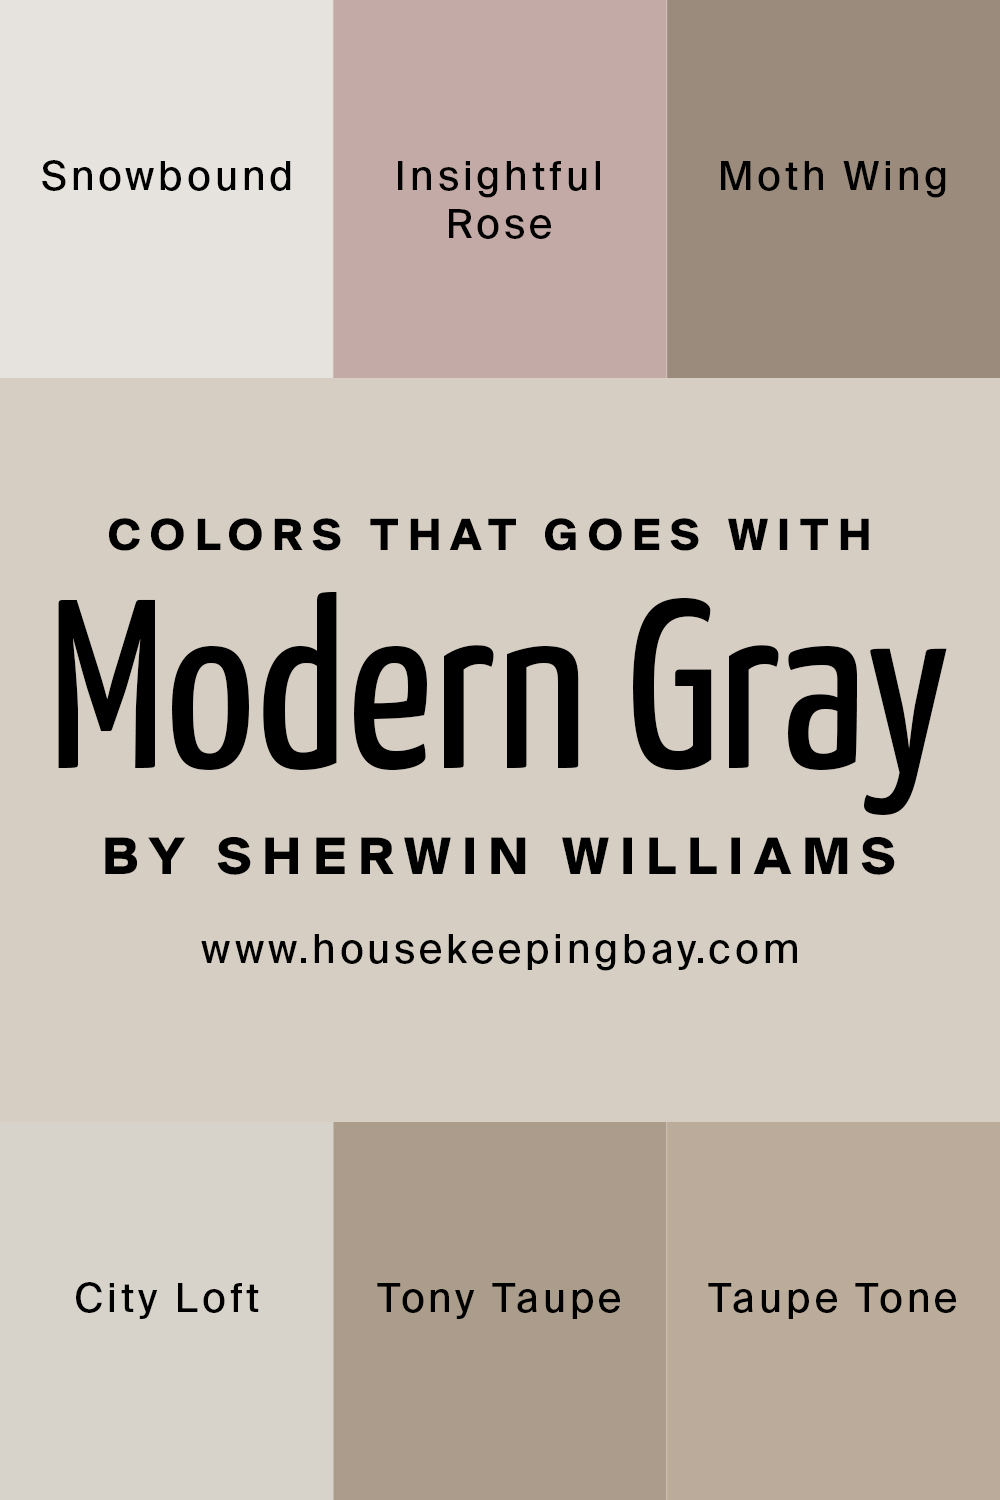 Colors that goes with Modern Gray by Sherwin Williams